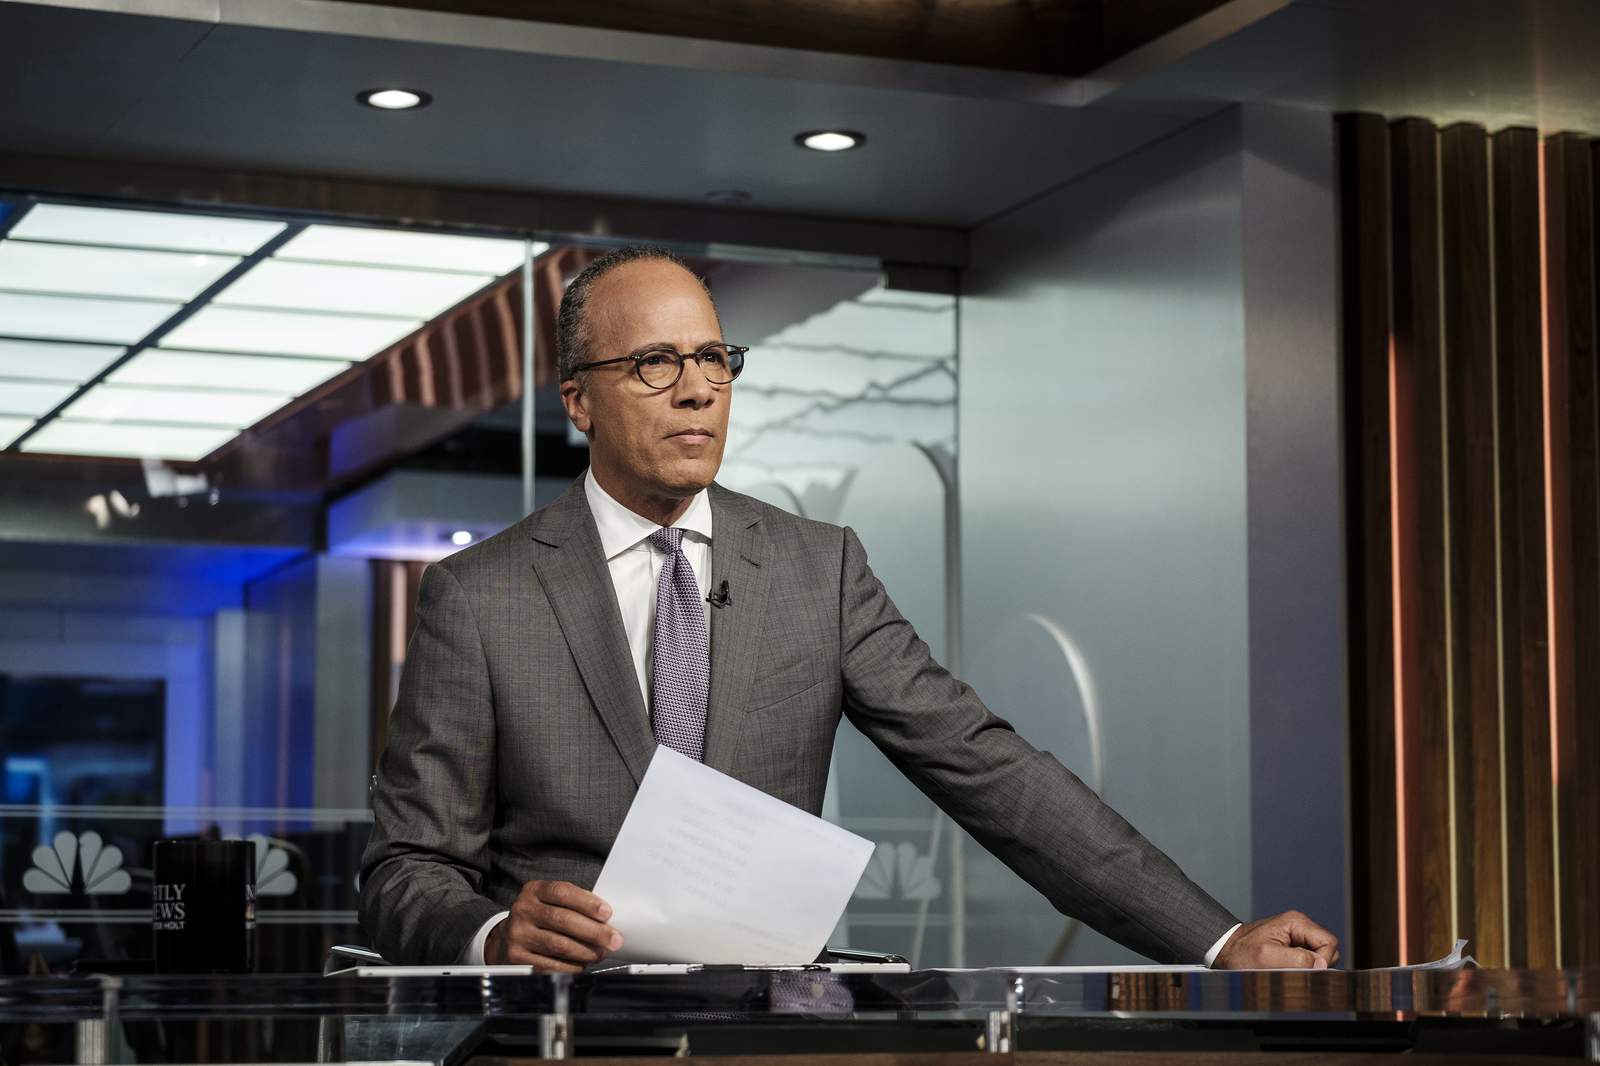 NBC's Holt adds empathetic commentaries to news anchor role